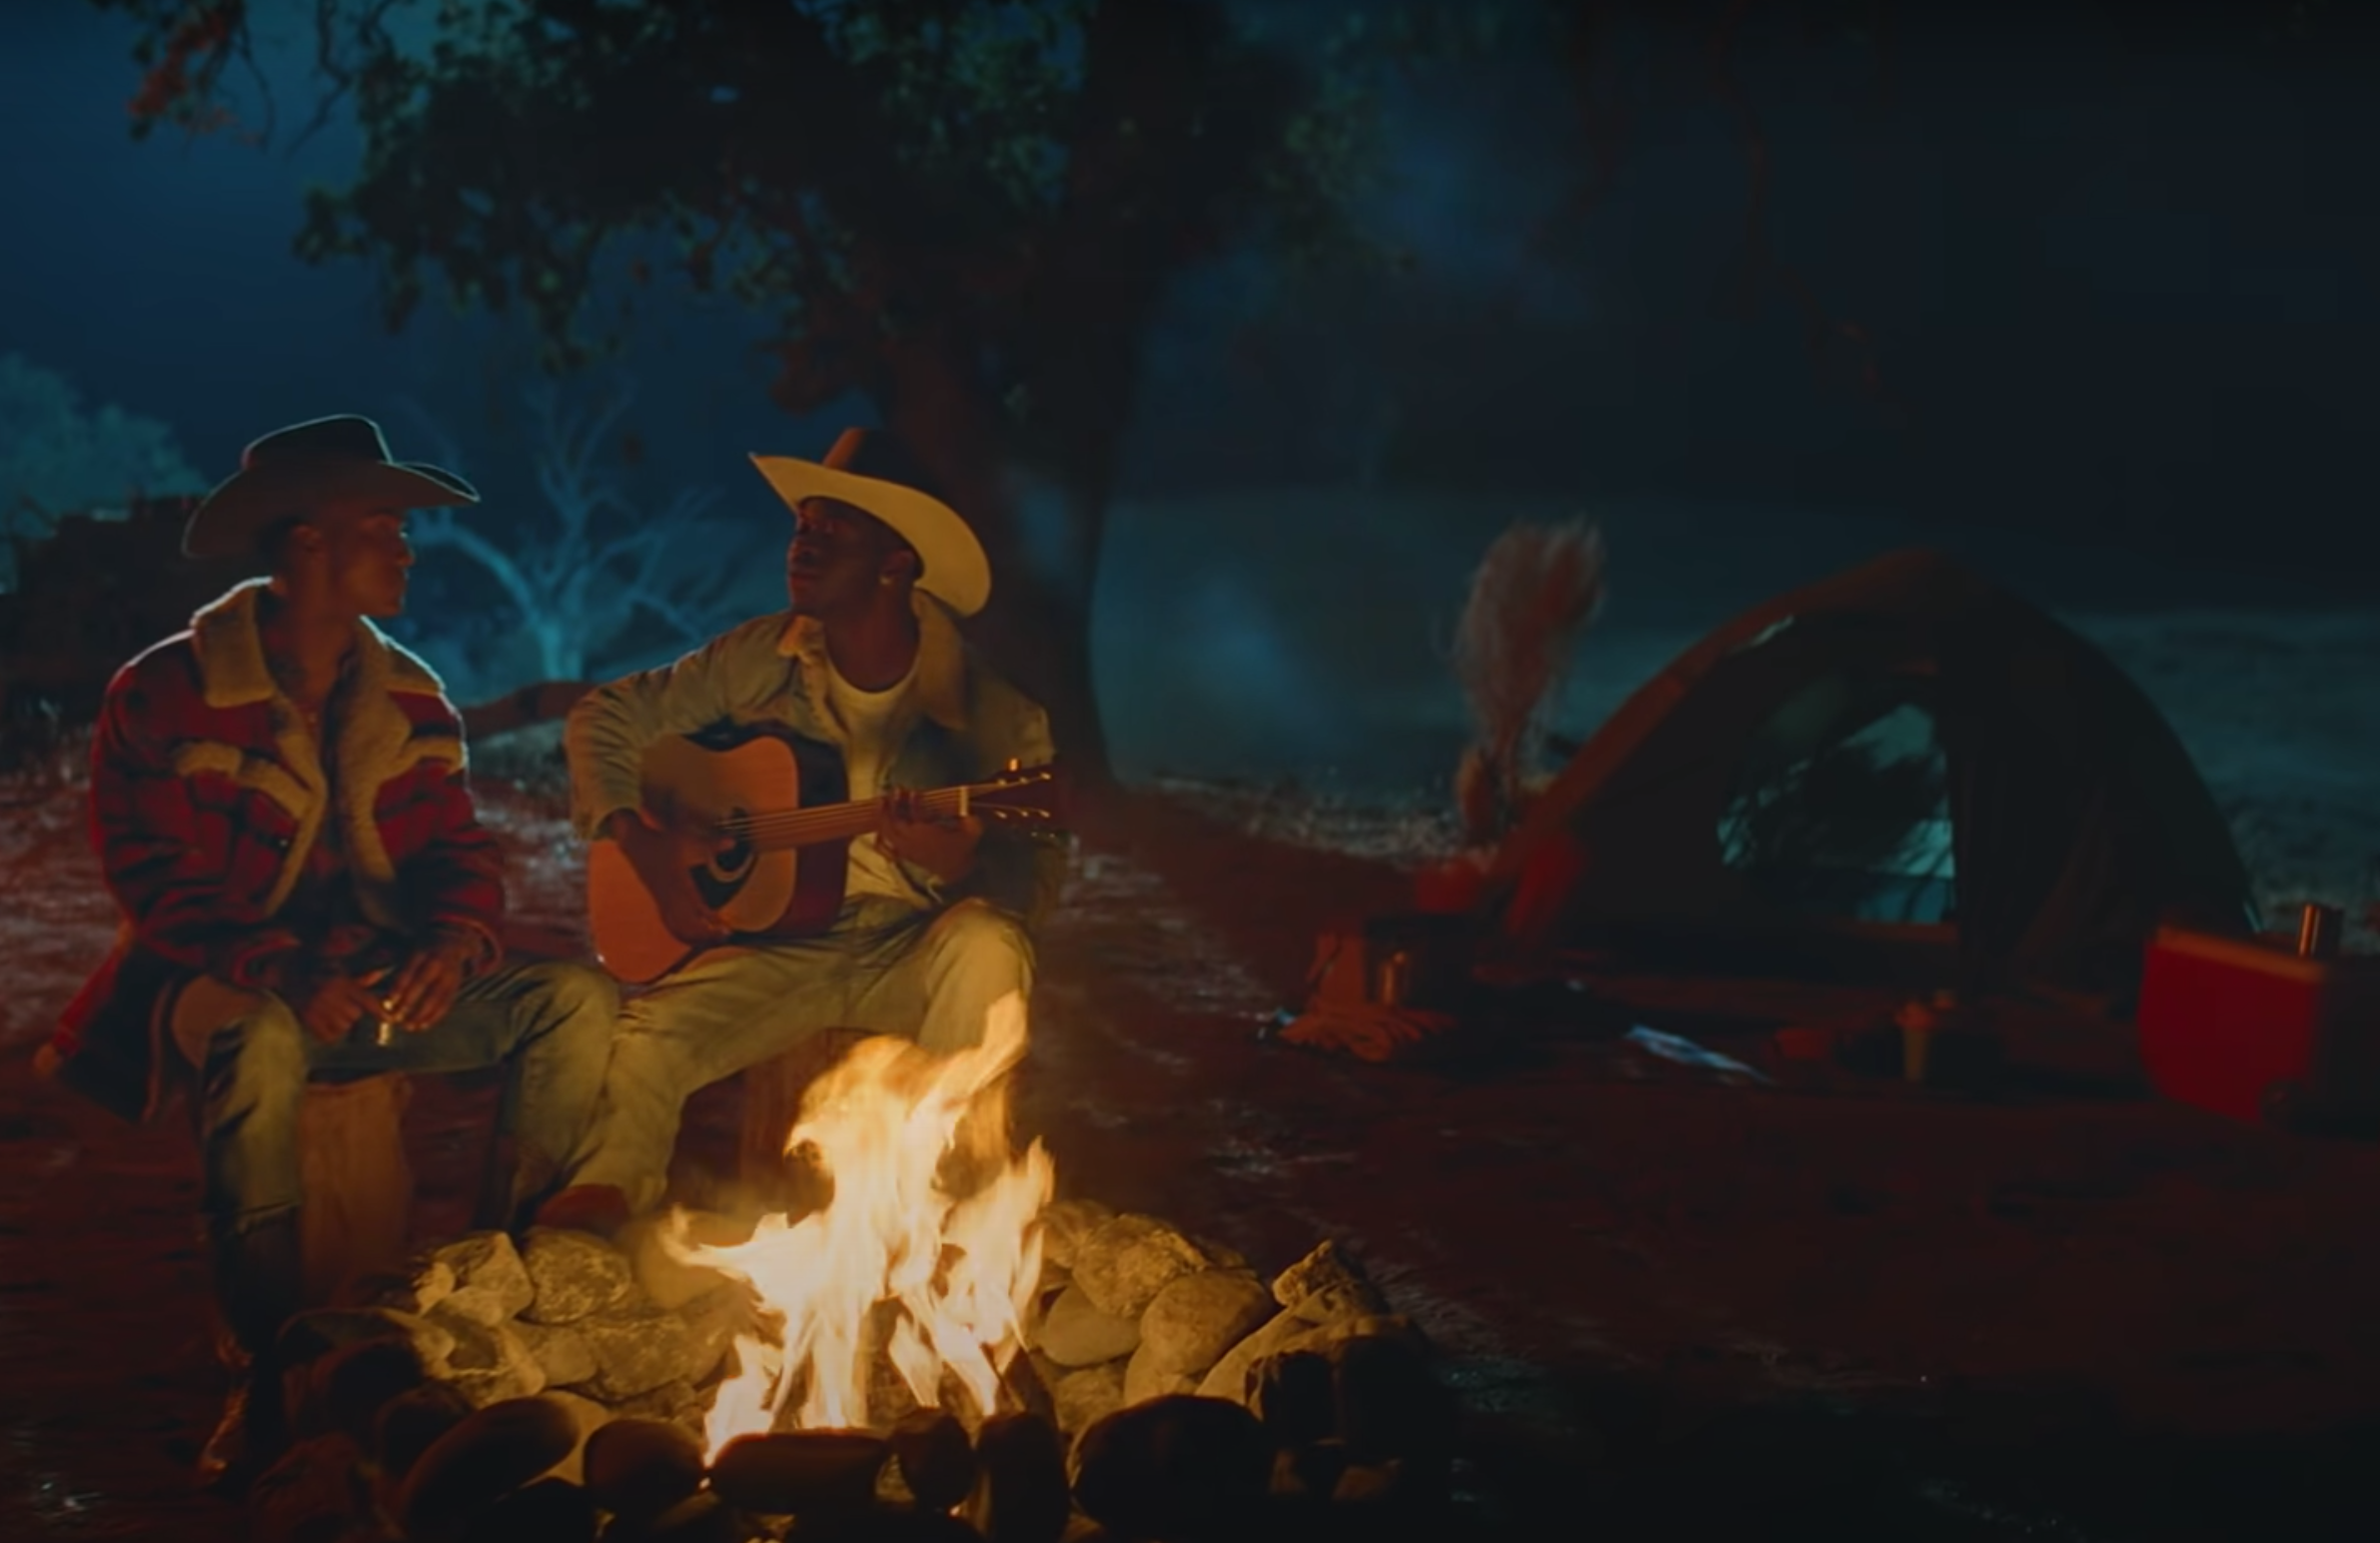 Nas and his lover sitting at a campfire.